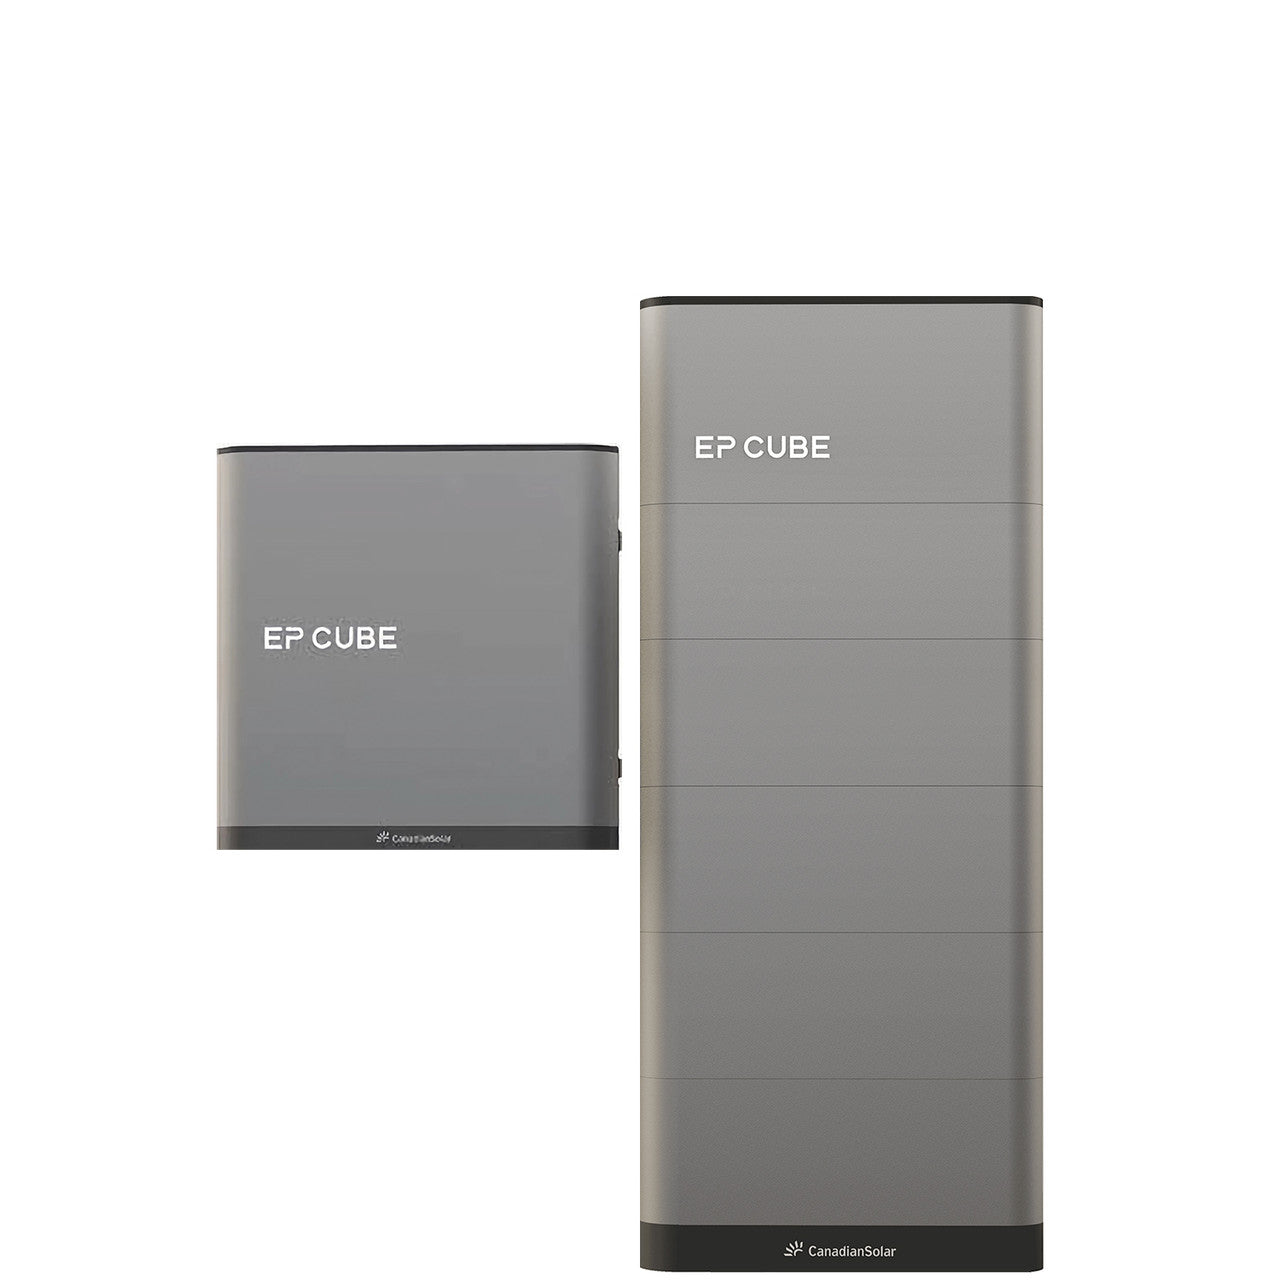 Canadian Solar EP Cube Energy Storage System - All-In-One Solar Backup Power | BNDL-C0000